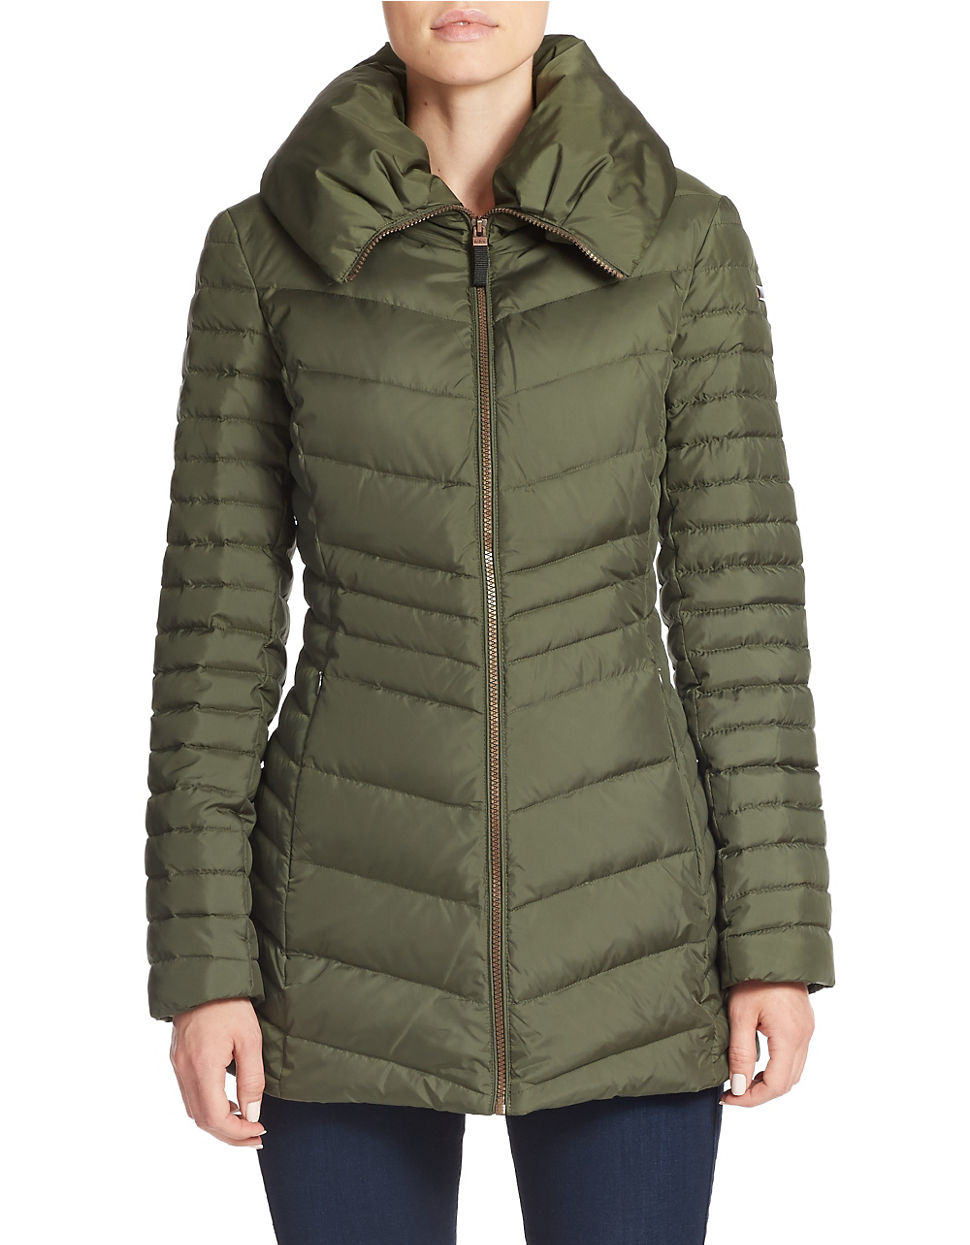 Marc New York Slim-fit Puffer Jacket in Olive (Green) - Lyst